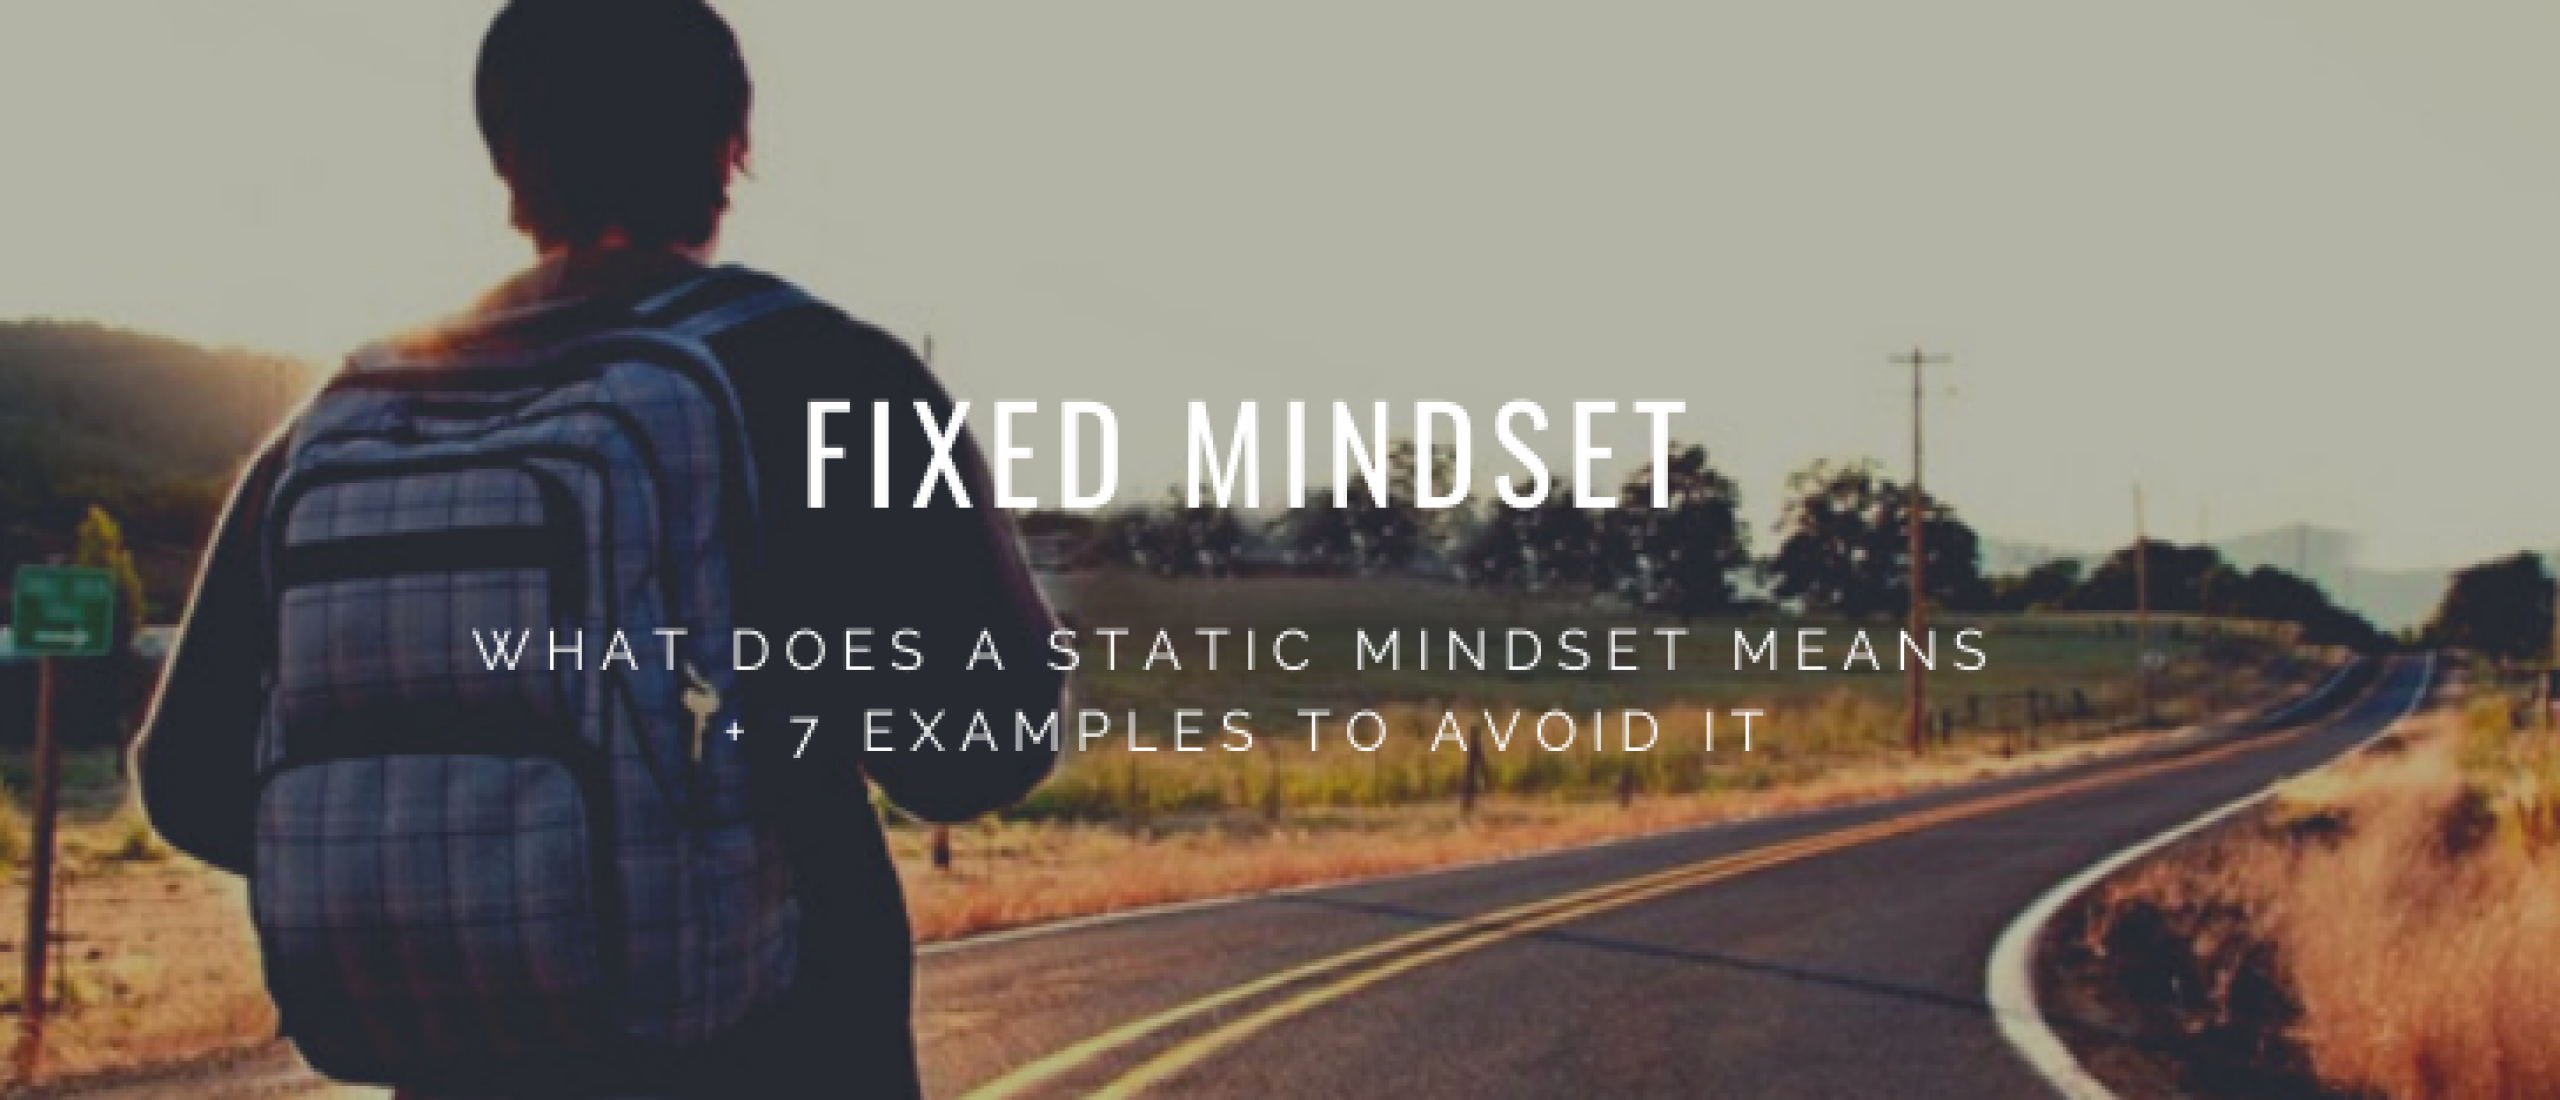 Fixed Mindset: What is a Static Mindset? Examples and Meaning